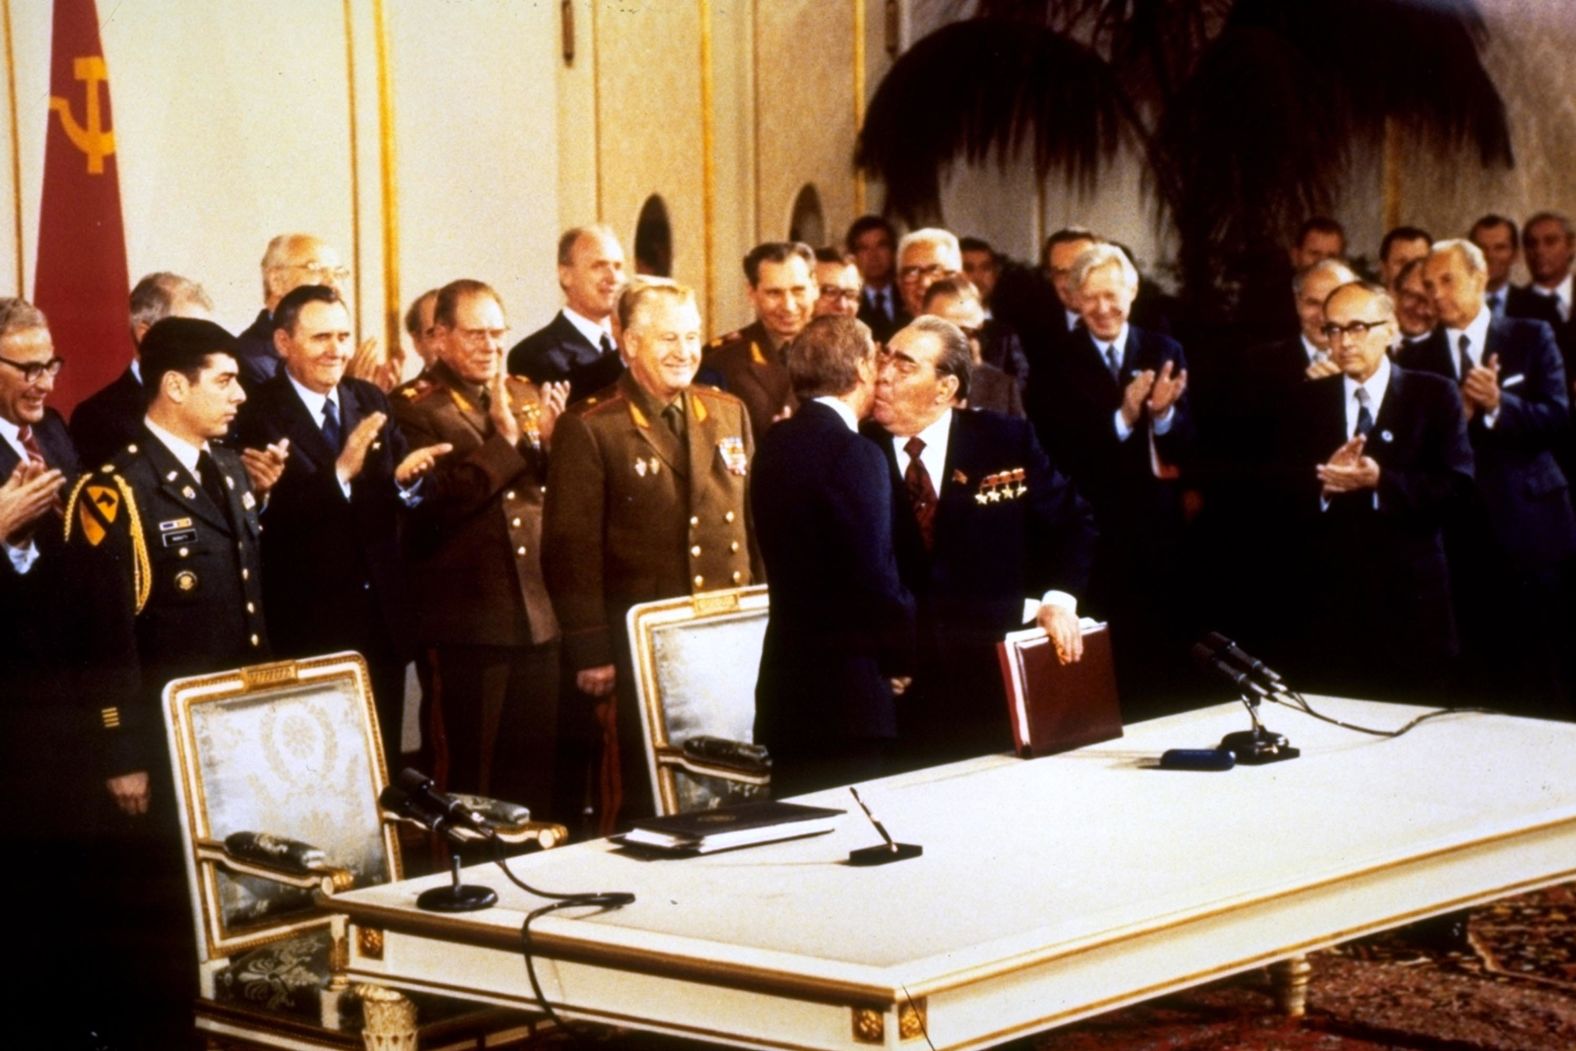 Brezhnev kisses US President Jimmy Carter while still holding the documents of the SALT II treaty they signed in Vienna, Austria, in 1979. The SALT treaties placed limits on nuclear weapons.